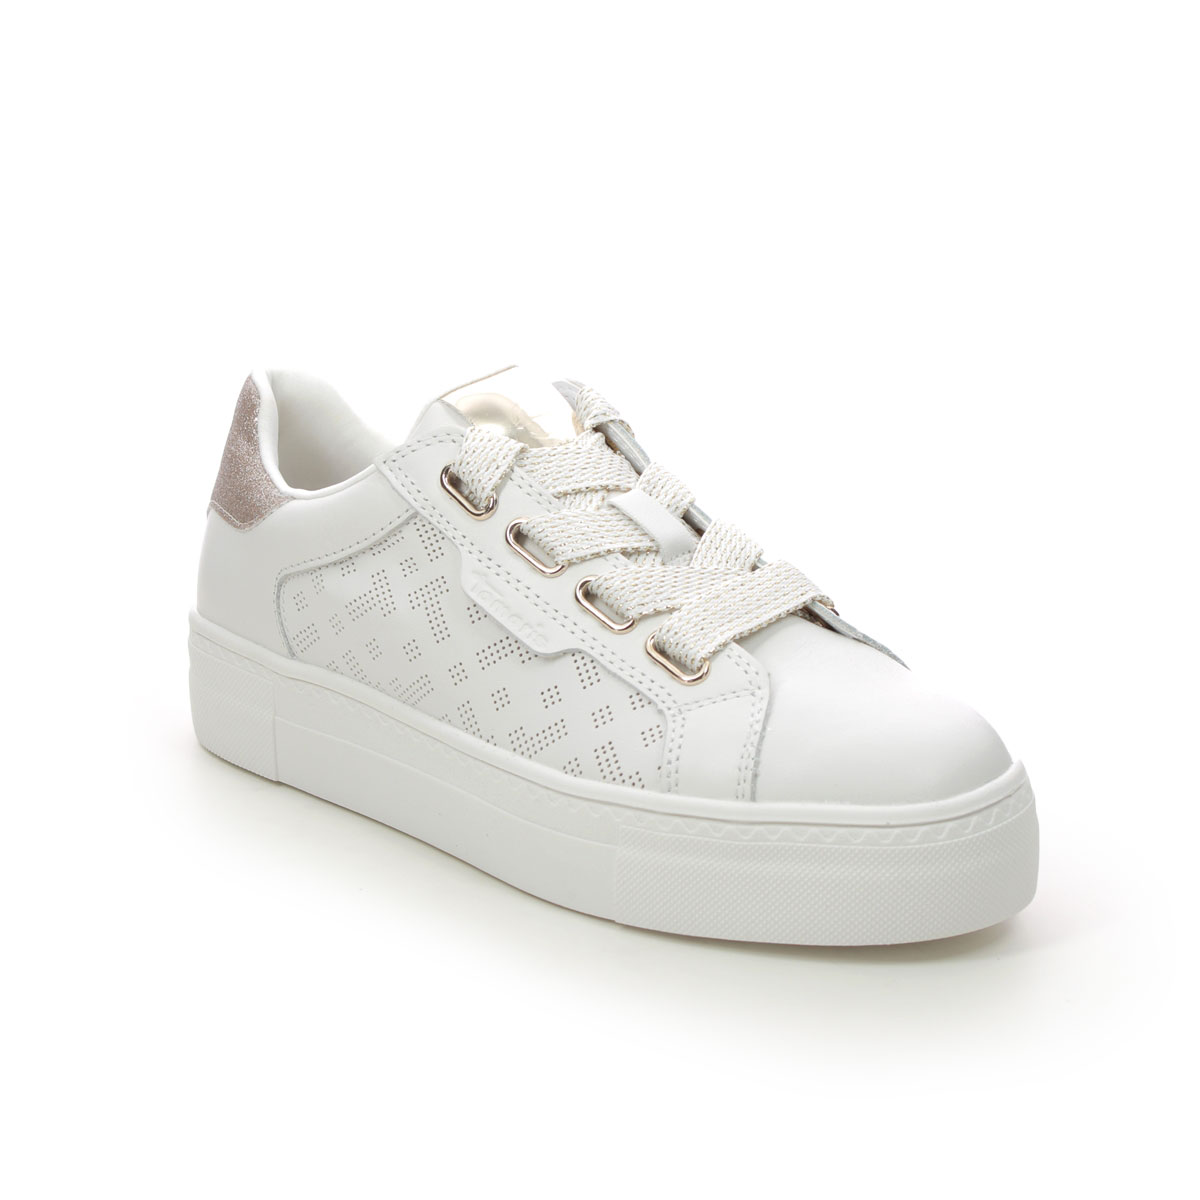 Tamaris Lima White Gold Womens Trainers 23707-20-190 In Size 39 In Plain White Gold